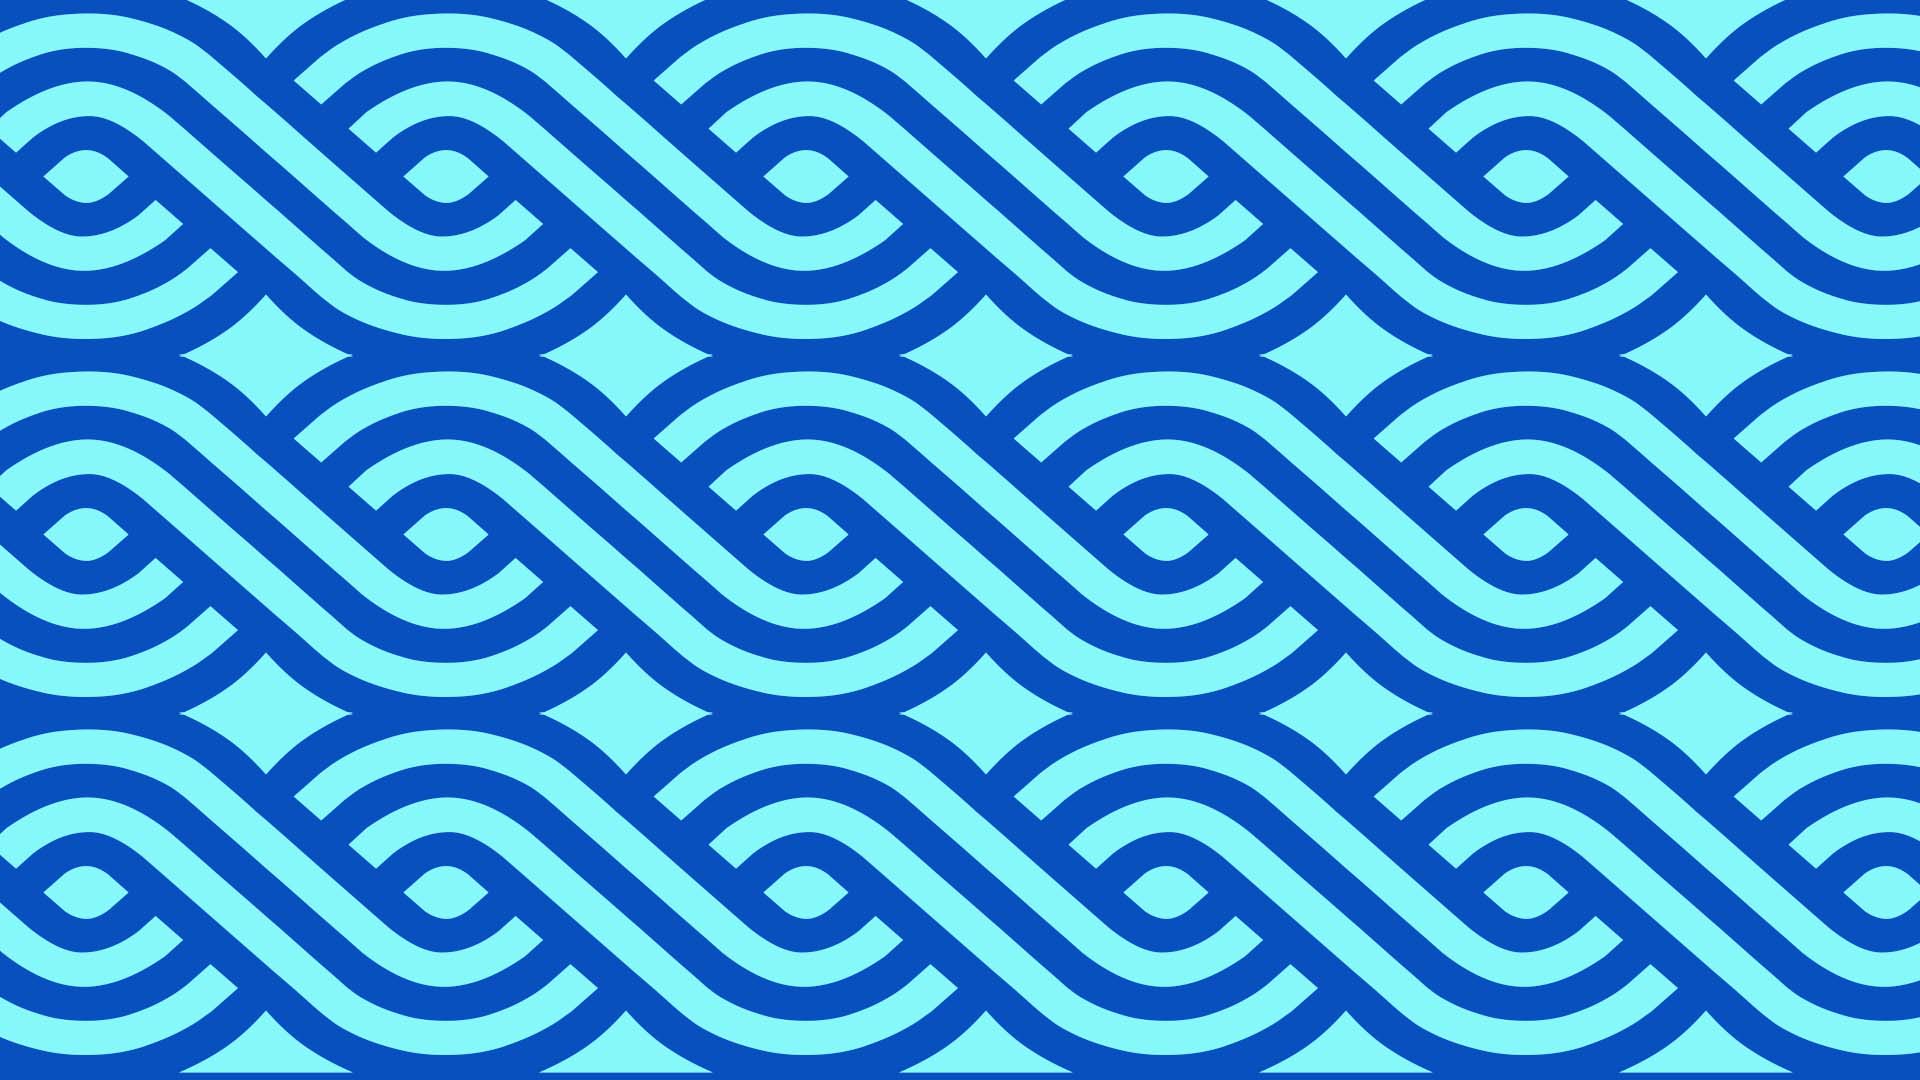 Blue Shapes Wave Wallpaper - Resolution:1920x1080 - ID:1167611 